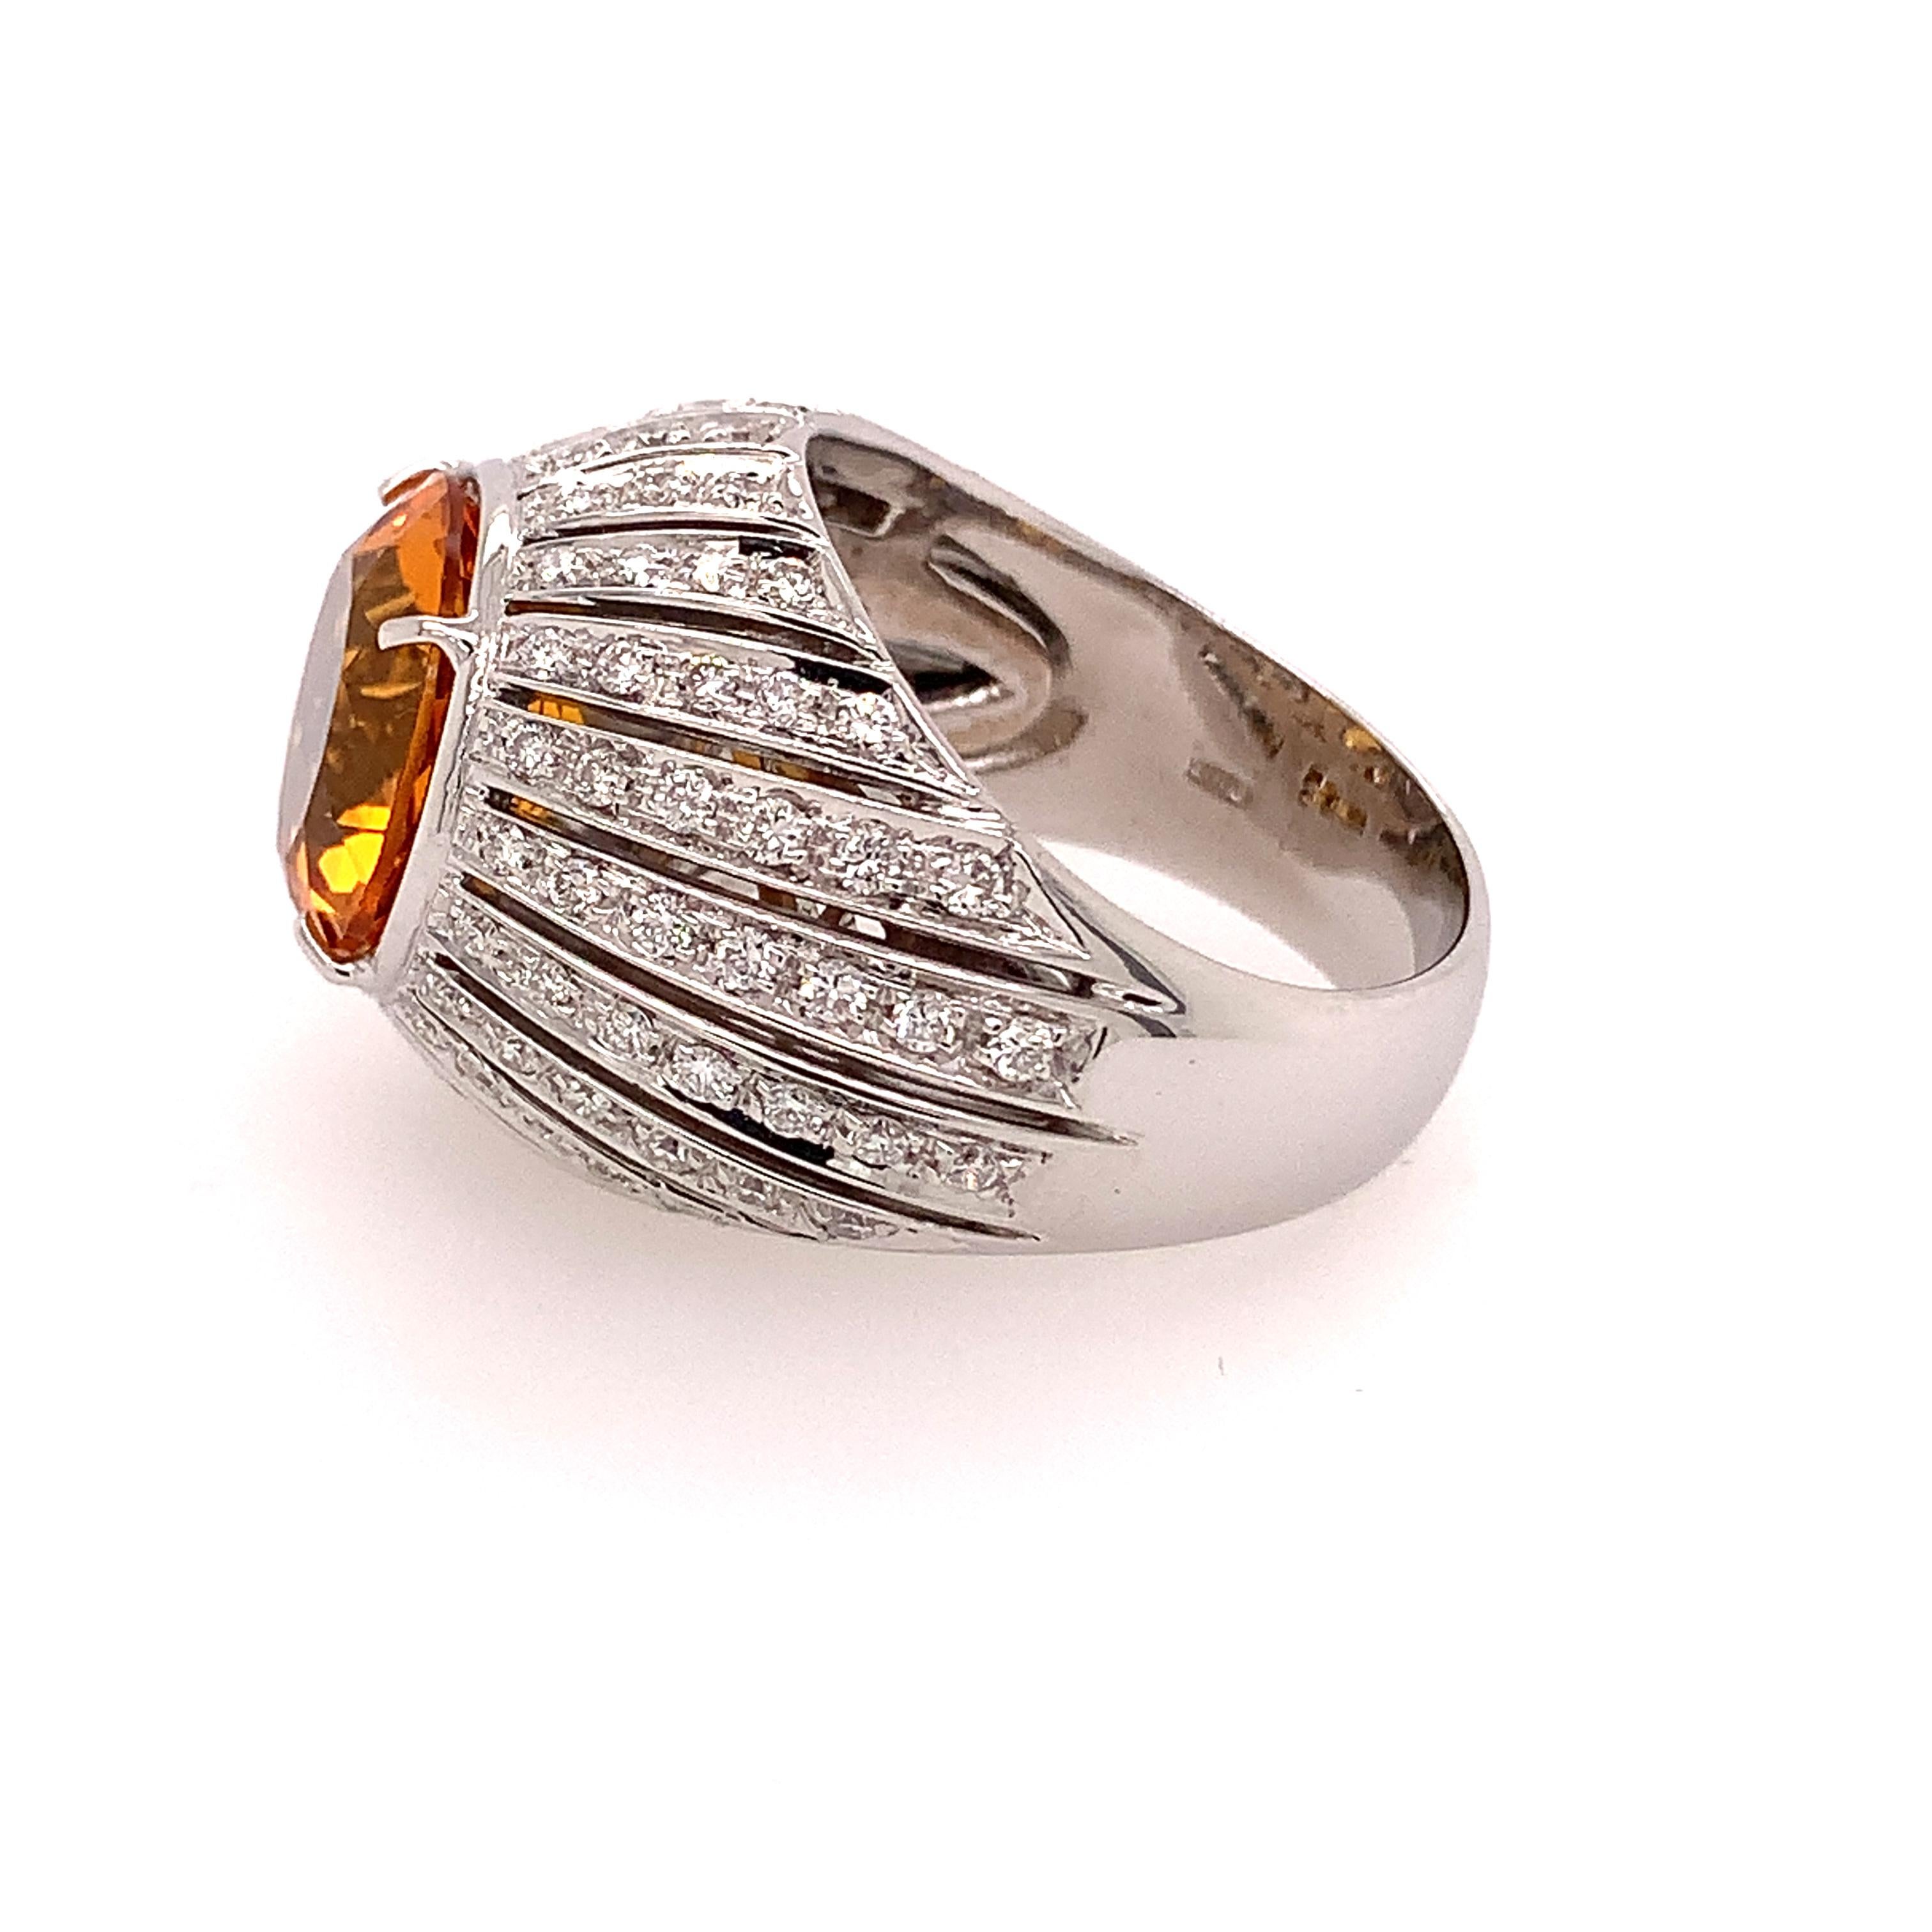 Modern 18kt White Gold One of a Kind Ring with 5 Ct Citrine and Diamonds